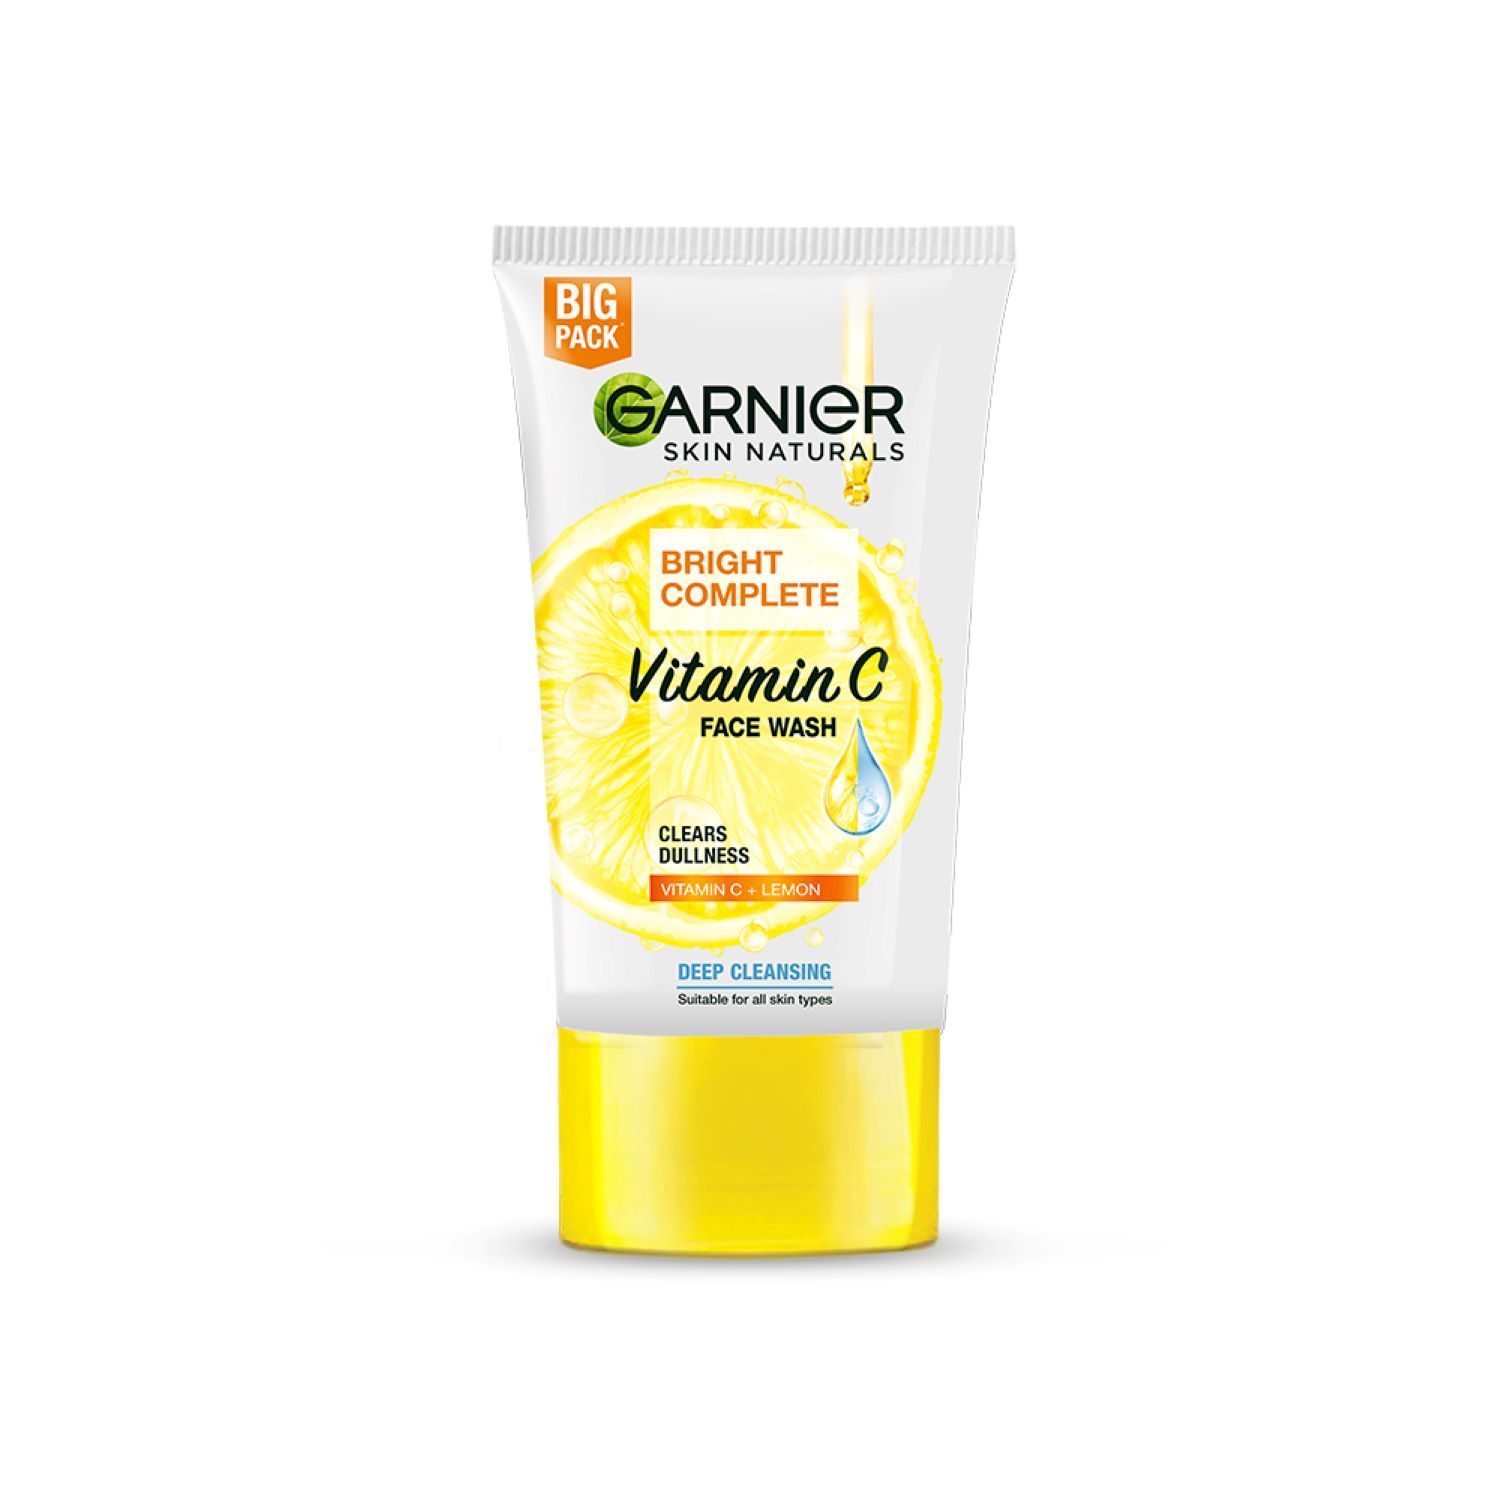 Buy Garnier Skin Naturals Bright Complete Vitamin C Face Wash - Vitamin C Face Wash For Brighter and Glowing Skin - Daily Cleanser Suitable For all Skin Types, 150g - Purplle